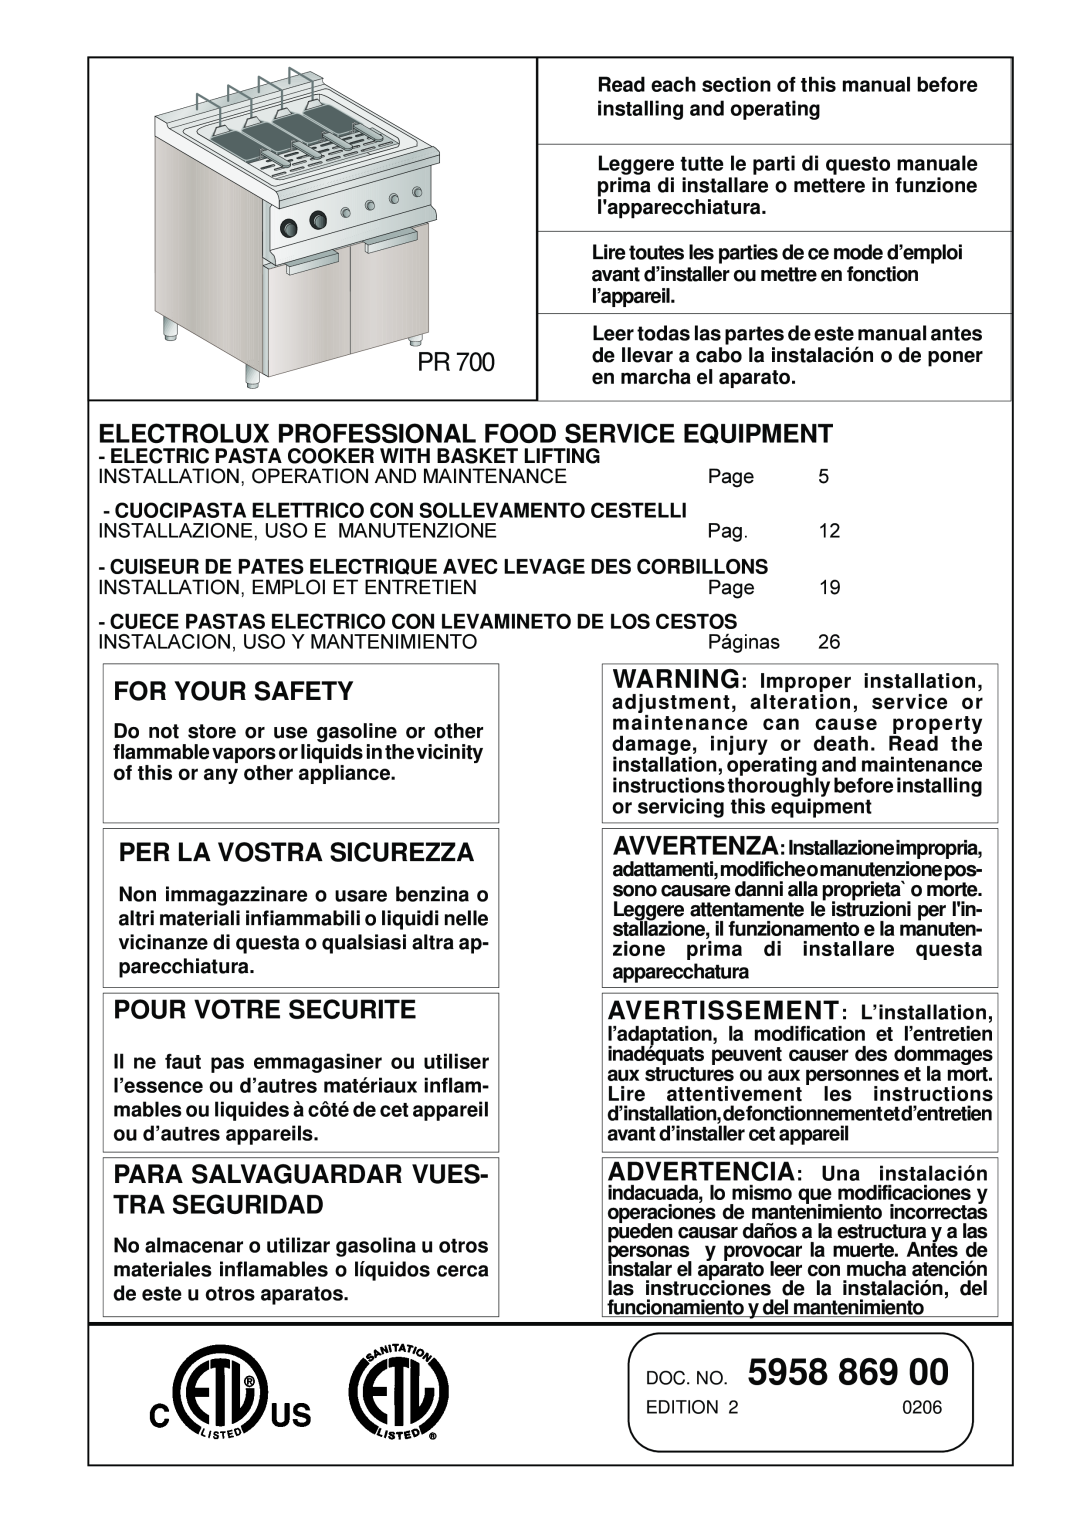 Electrolux PR 700 manual DOC. NO. 5958, Electrolux Professional Food Service Equipment, For Your Safety 